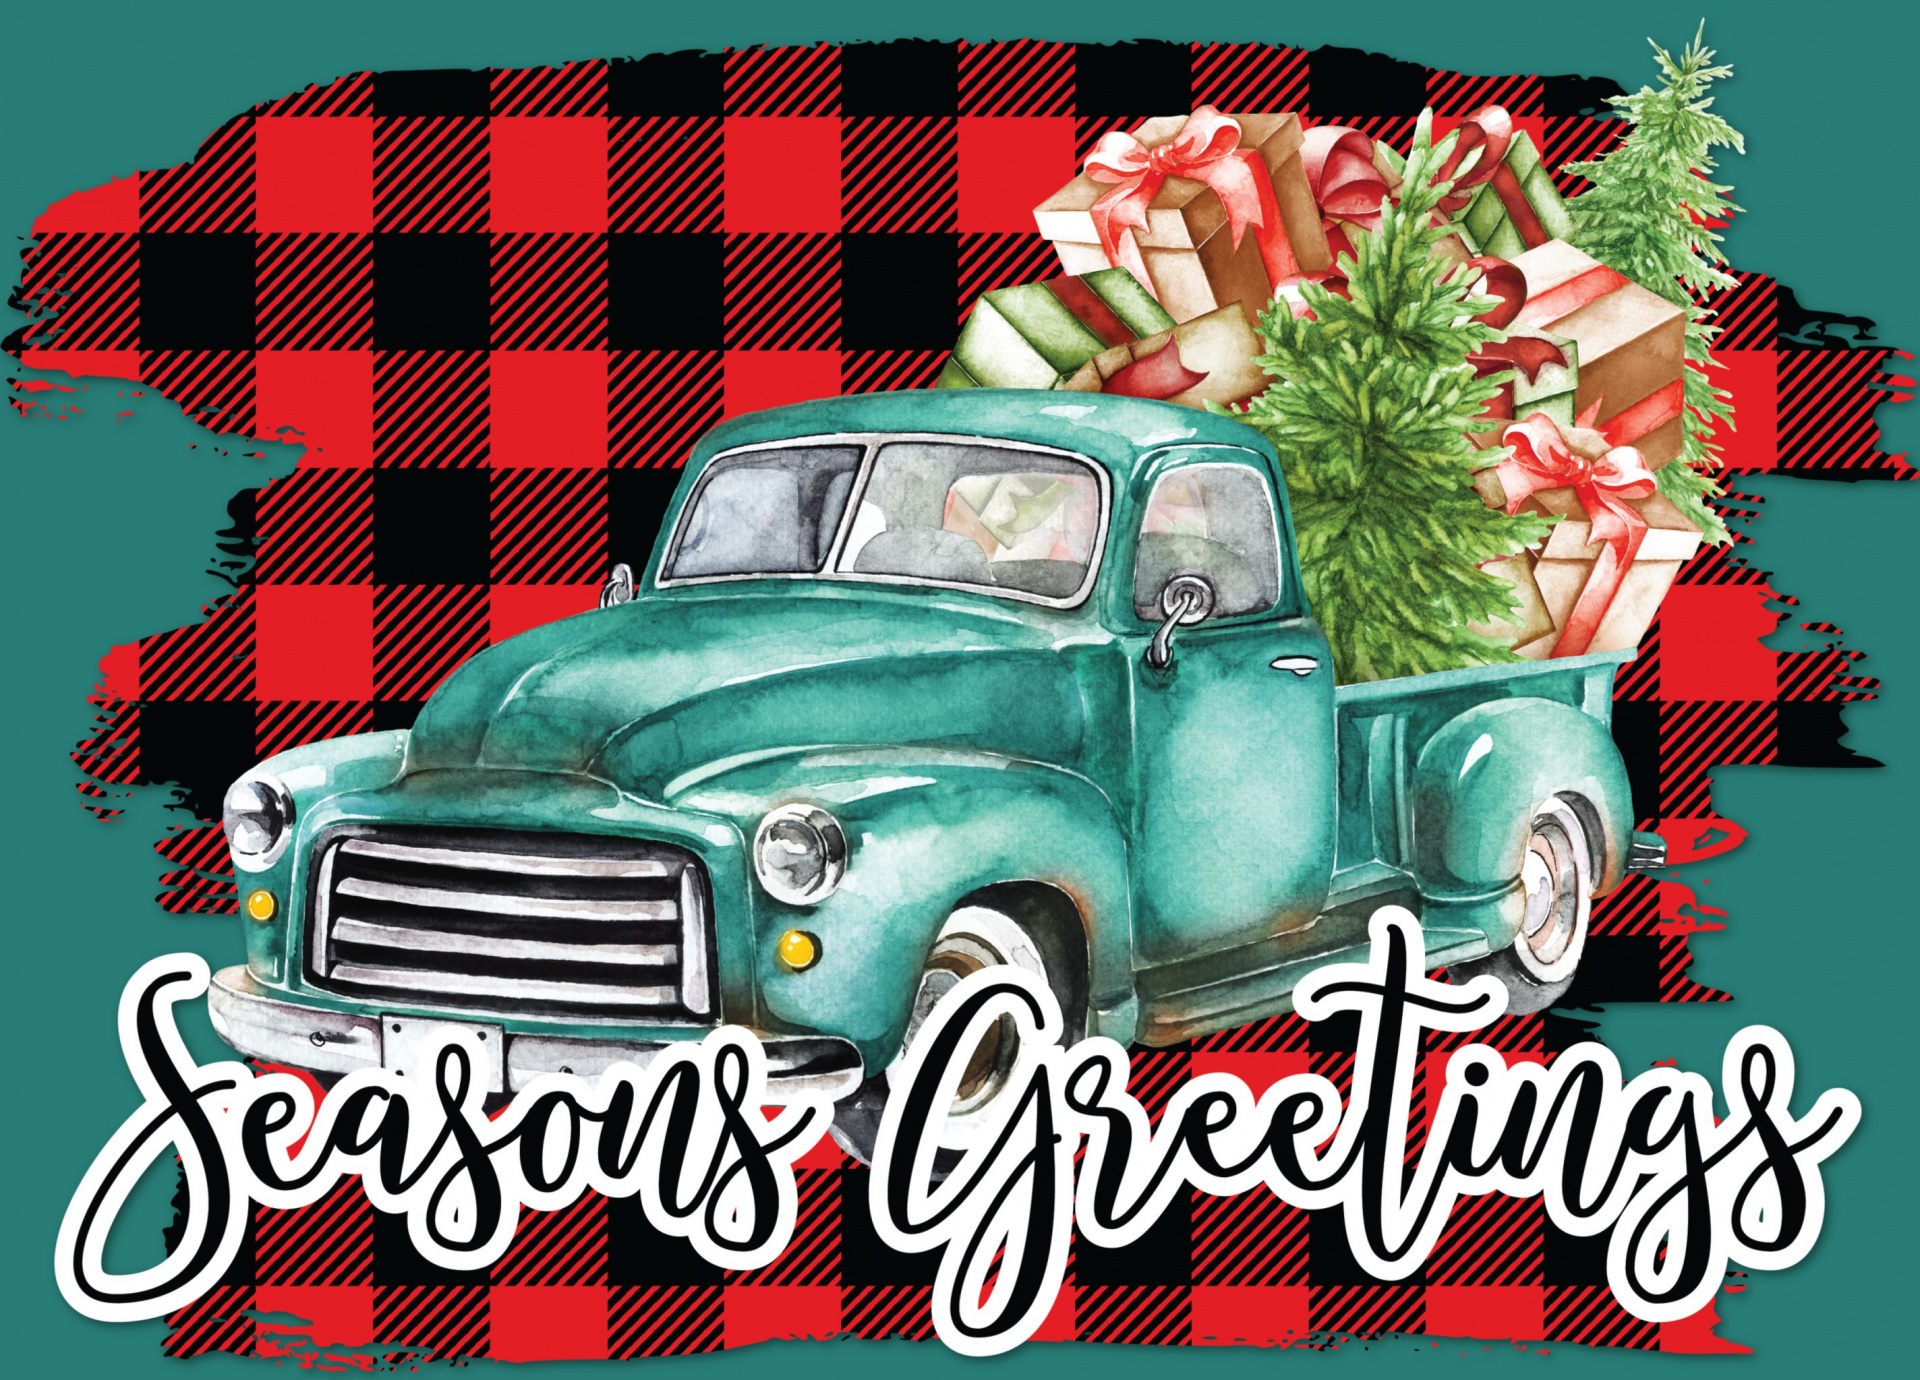 vintage old green pick-up truck full of Christmas trees and presents on a plaid swatch with green wood background with greeting message